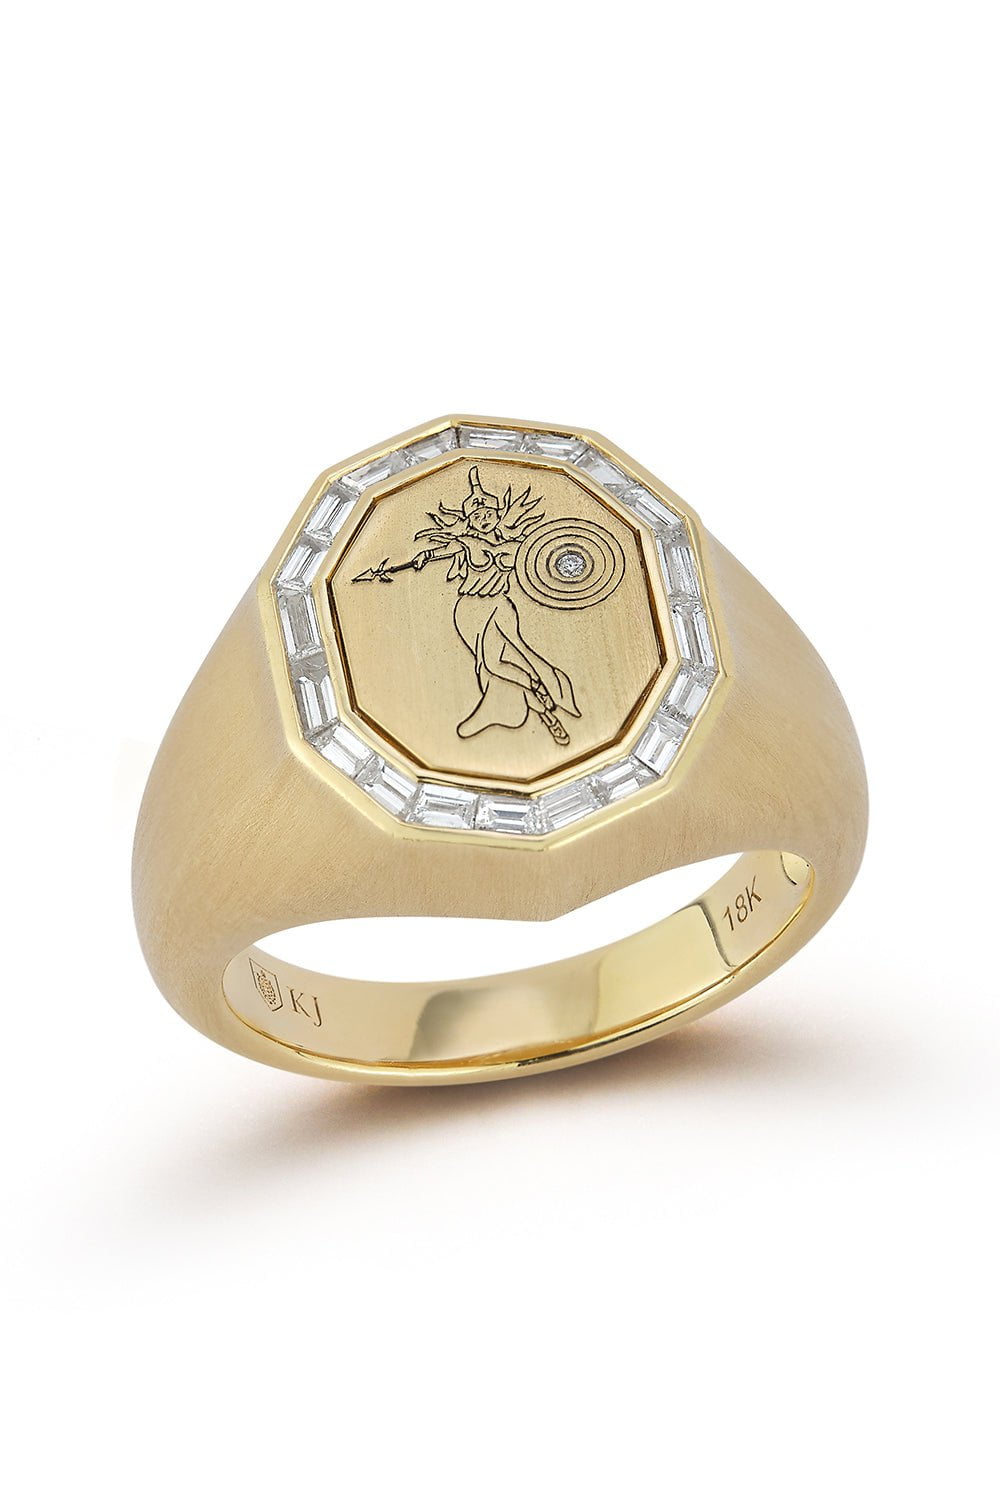 KATHERINE JETTER-The Baguette Athena Ring-YELLOW GOLD